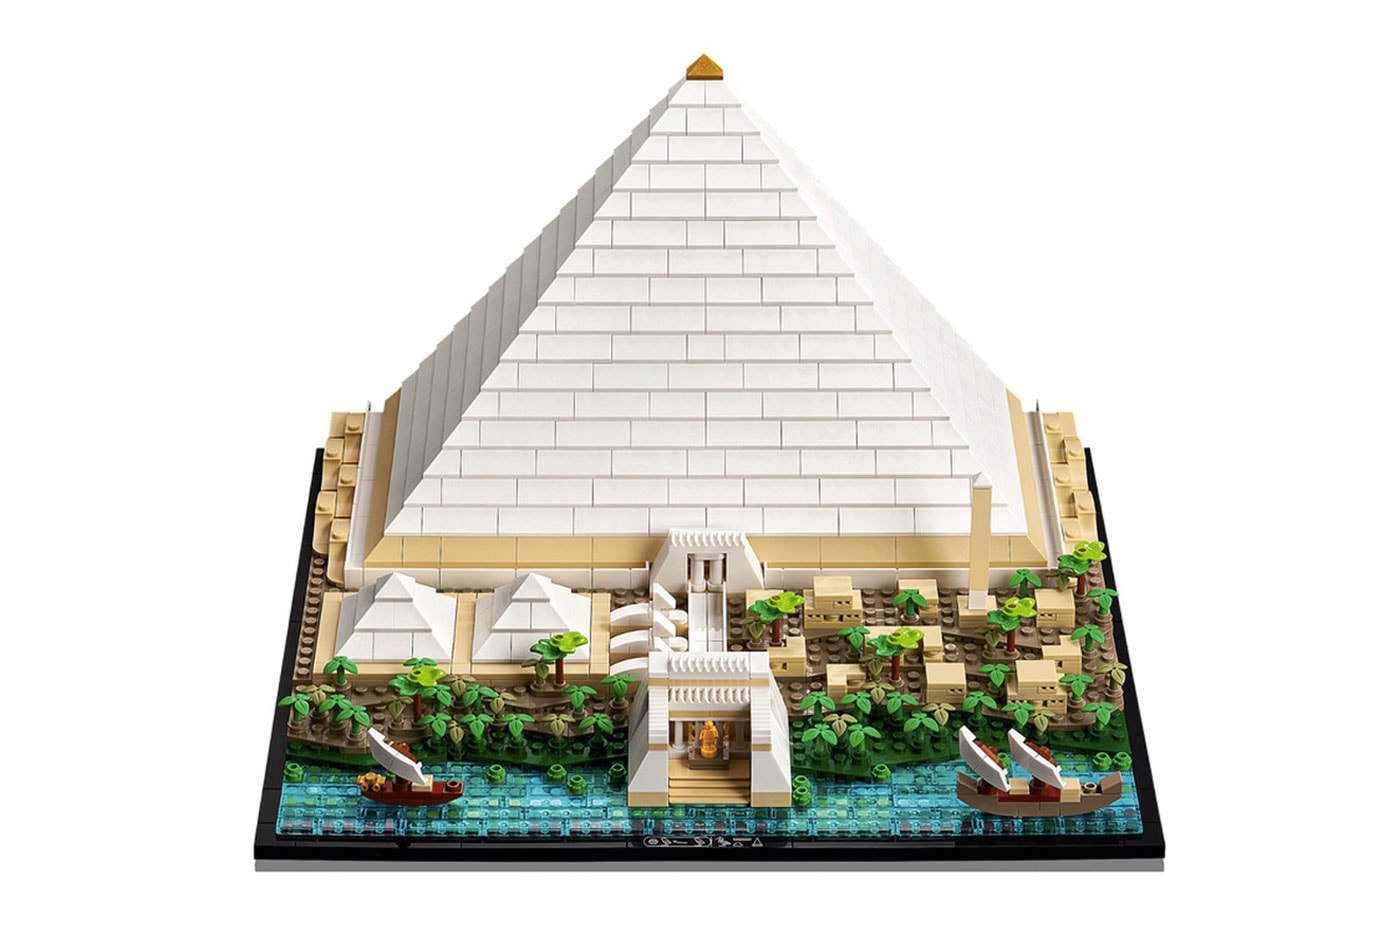 LEGO Architecture egyptian pyramid of giza 1476 blocks  seven wonders of the ancient world main tunnels chambers nile obelisk sphinx  release info date price 